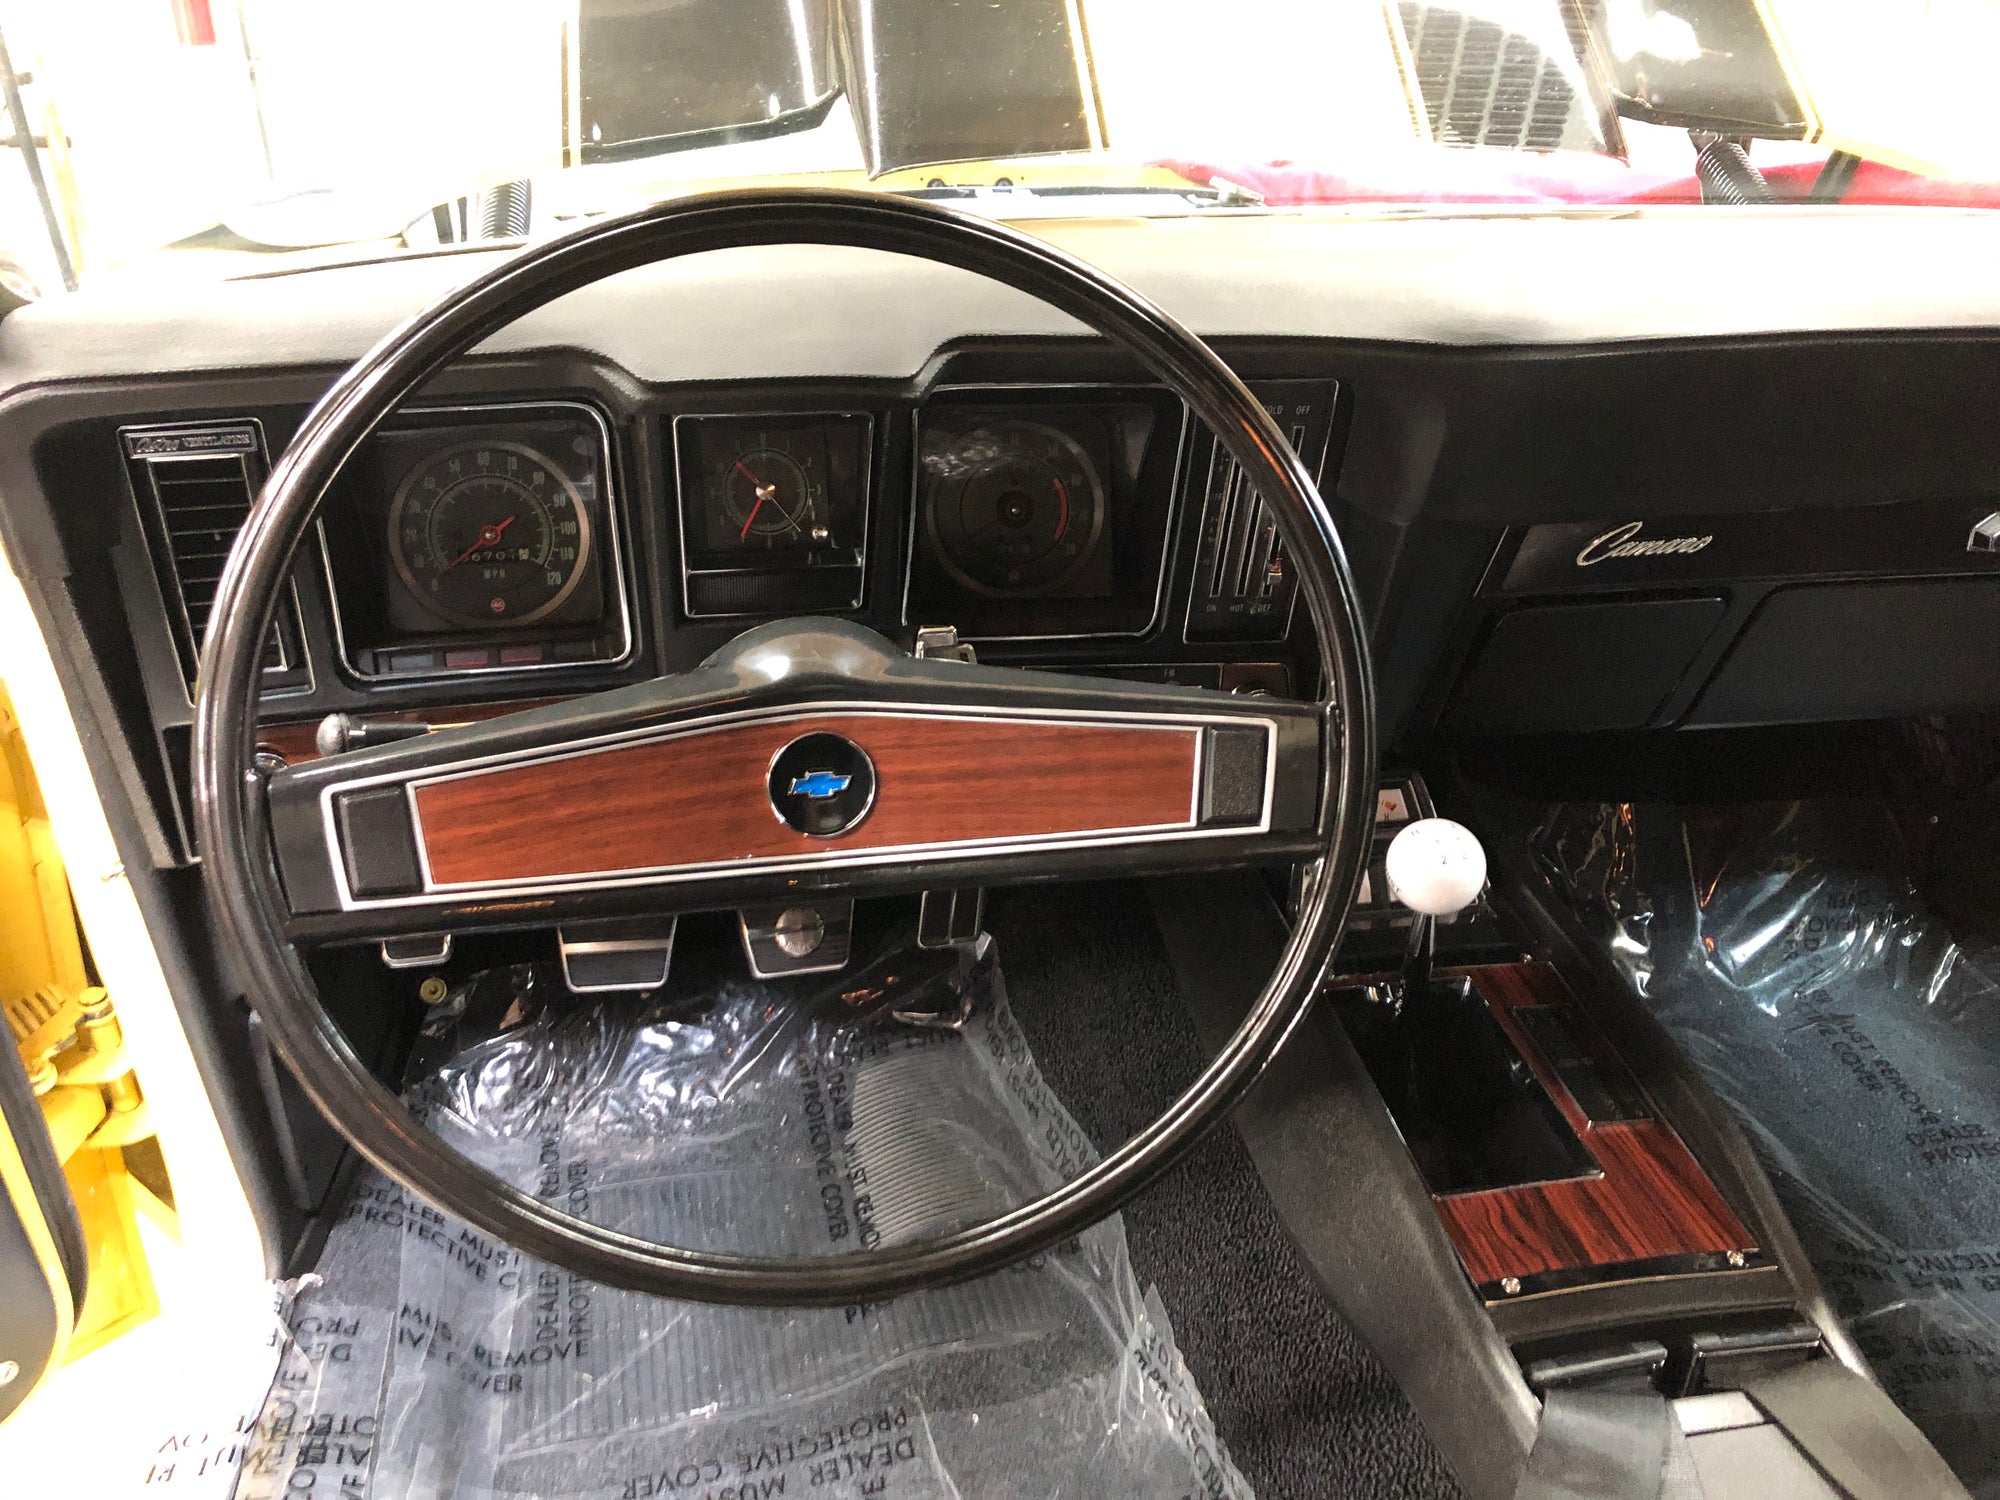 Z/28 Project Interior Decorating!